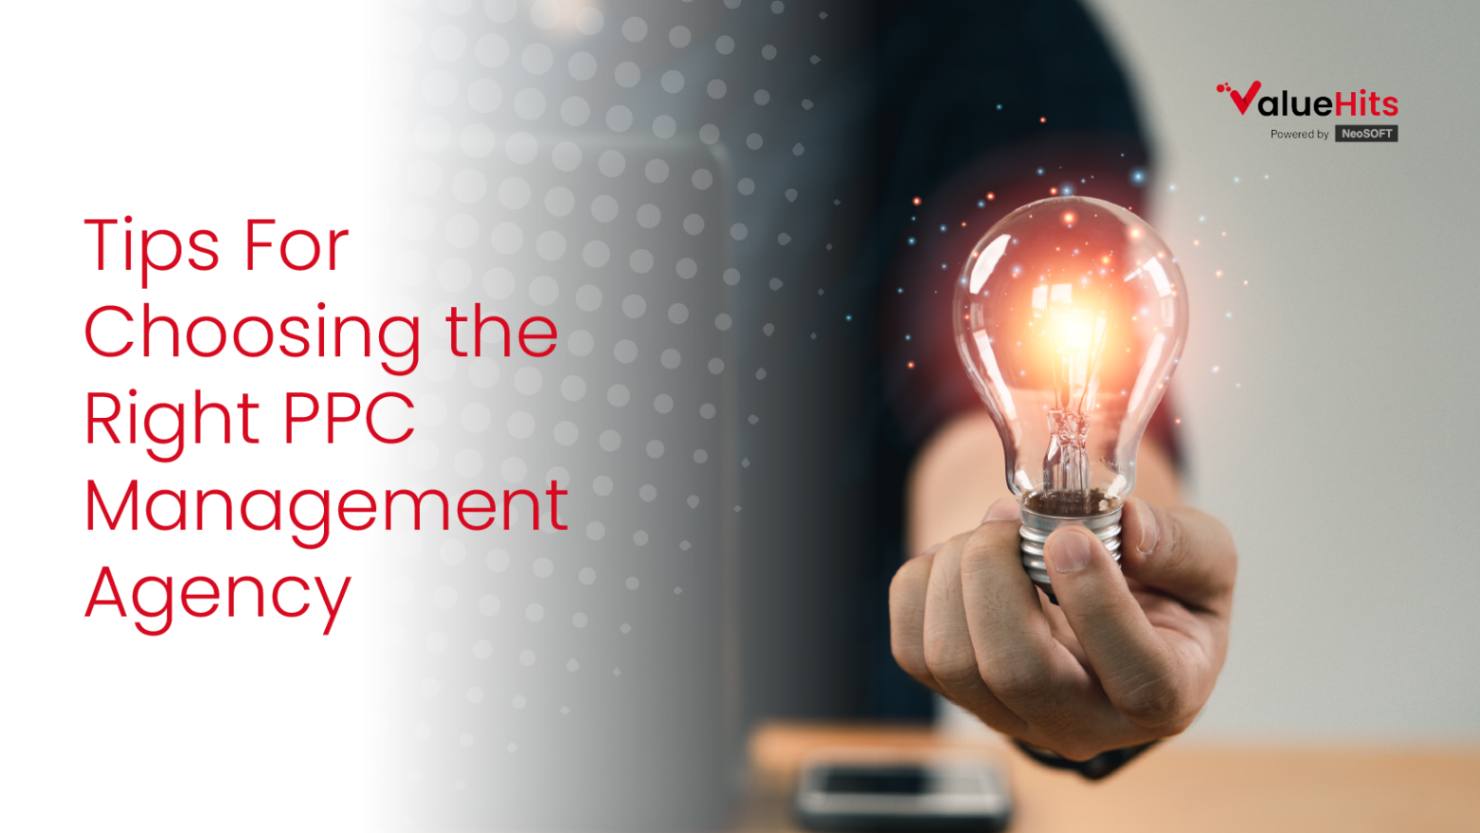 Tips For Choosing the Right PPC Management Agency